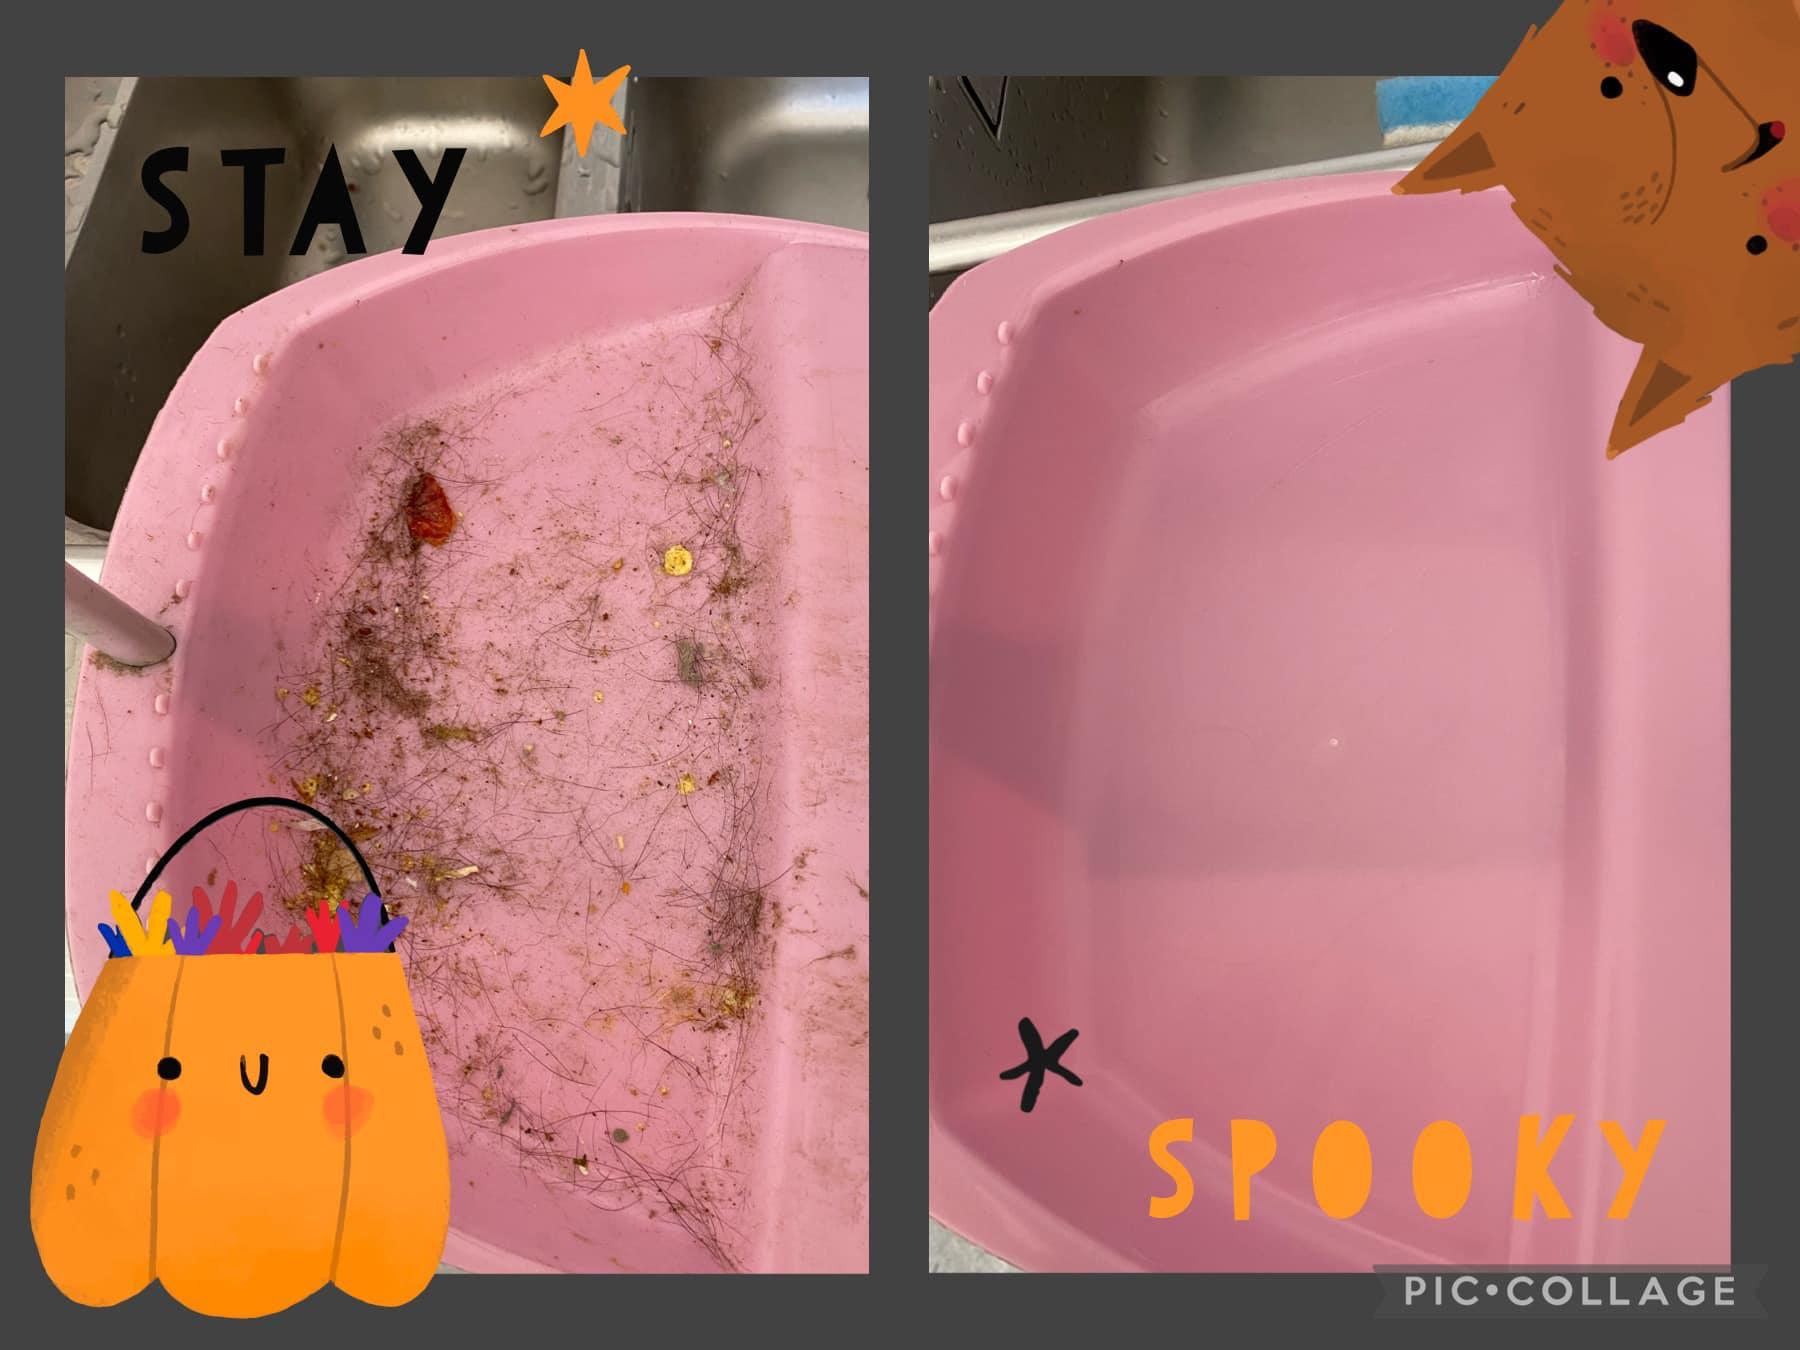 Before and after cleaning the pink kitchen scoop.